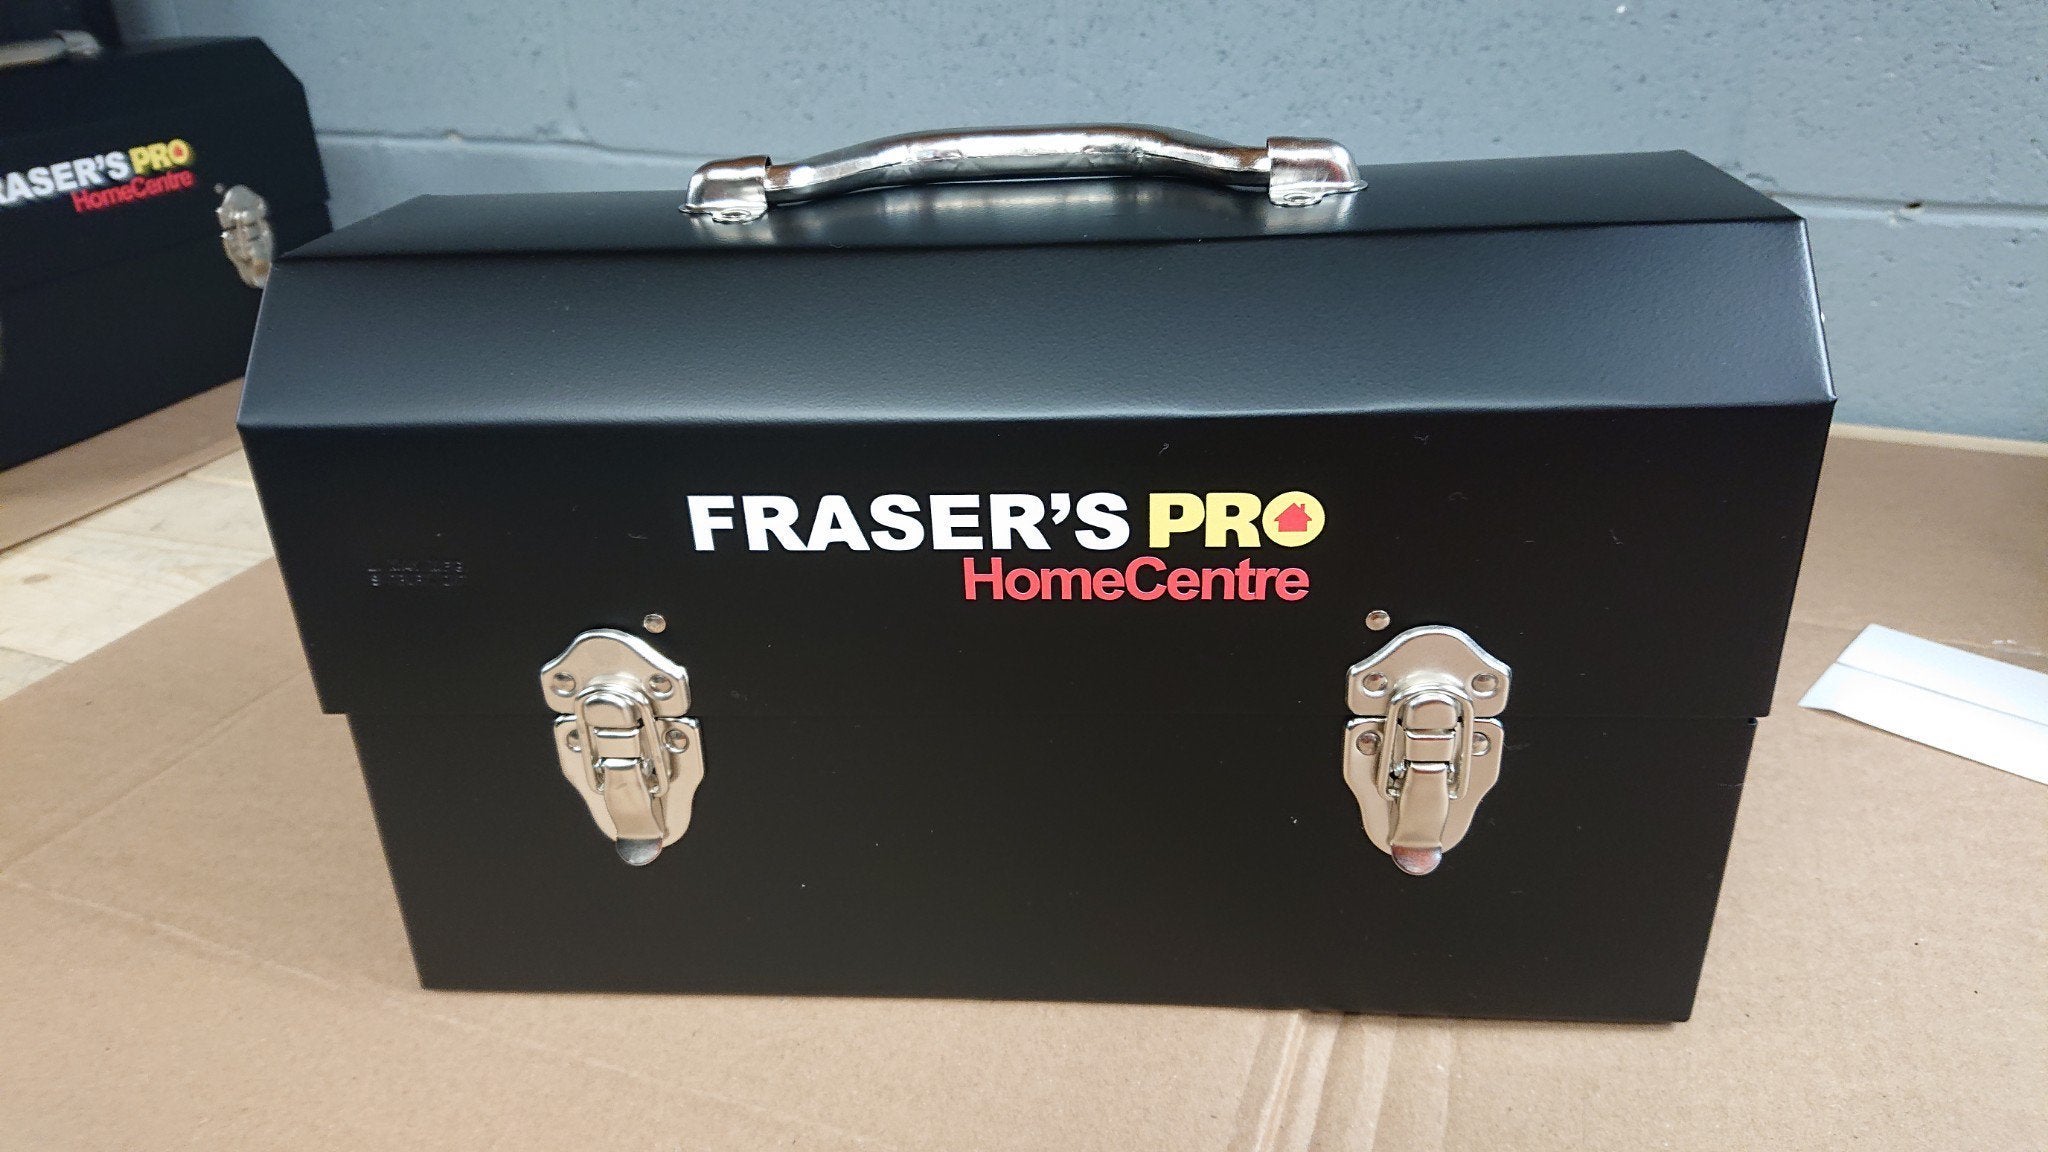 cut letter sticker with fraser's pro homecentre logo on a matte black L. May lunchbox